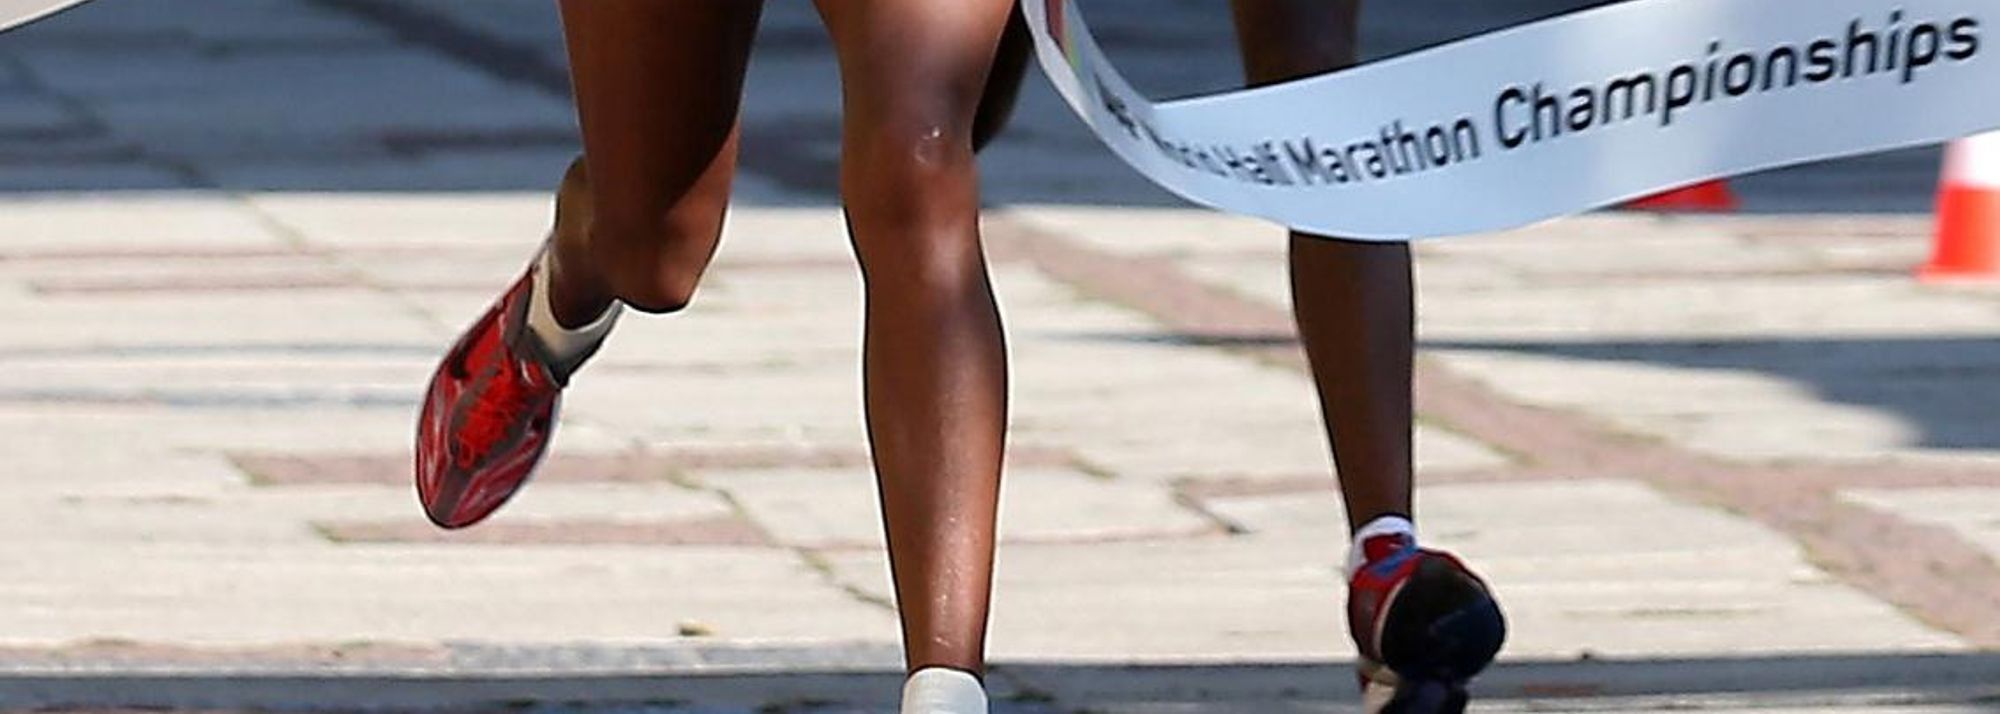 Battling against warm and humid conditions, Meseret Hailu led Ethiopia to an upset victory in the team race with her surprise triumph at the 20th edition of the World Half Marathon Championships in Kavarna, Bulgaria.